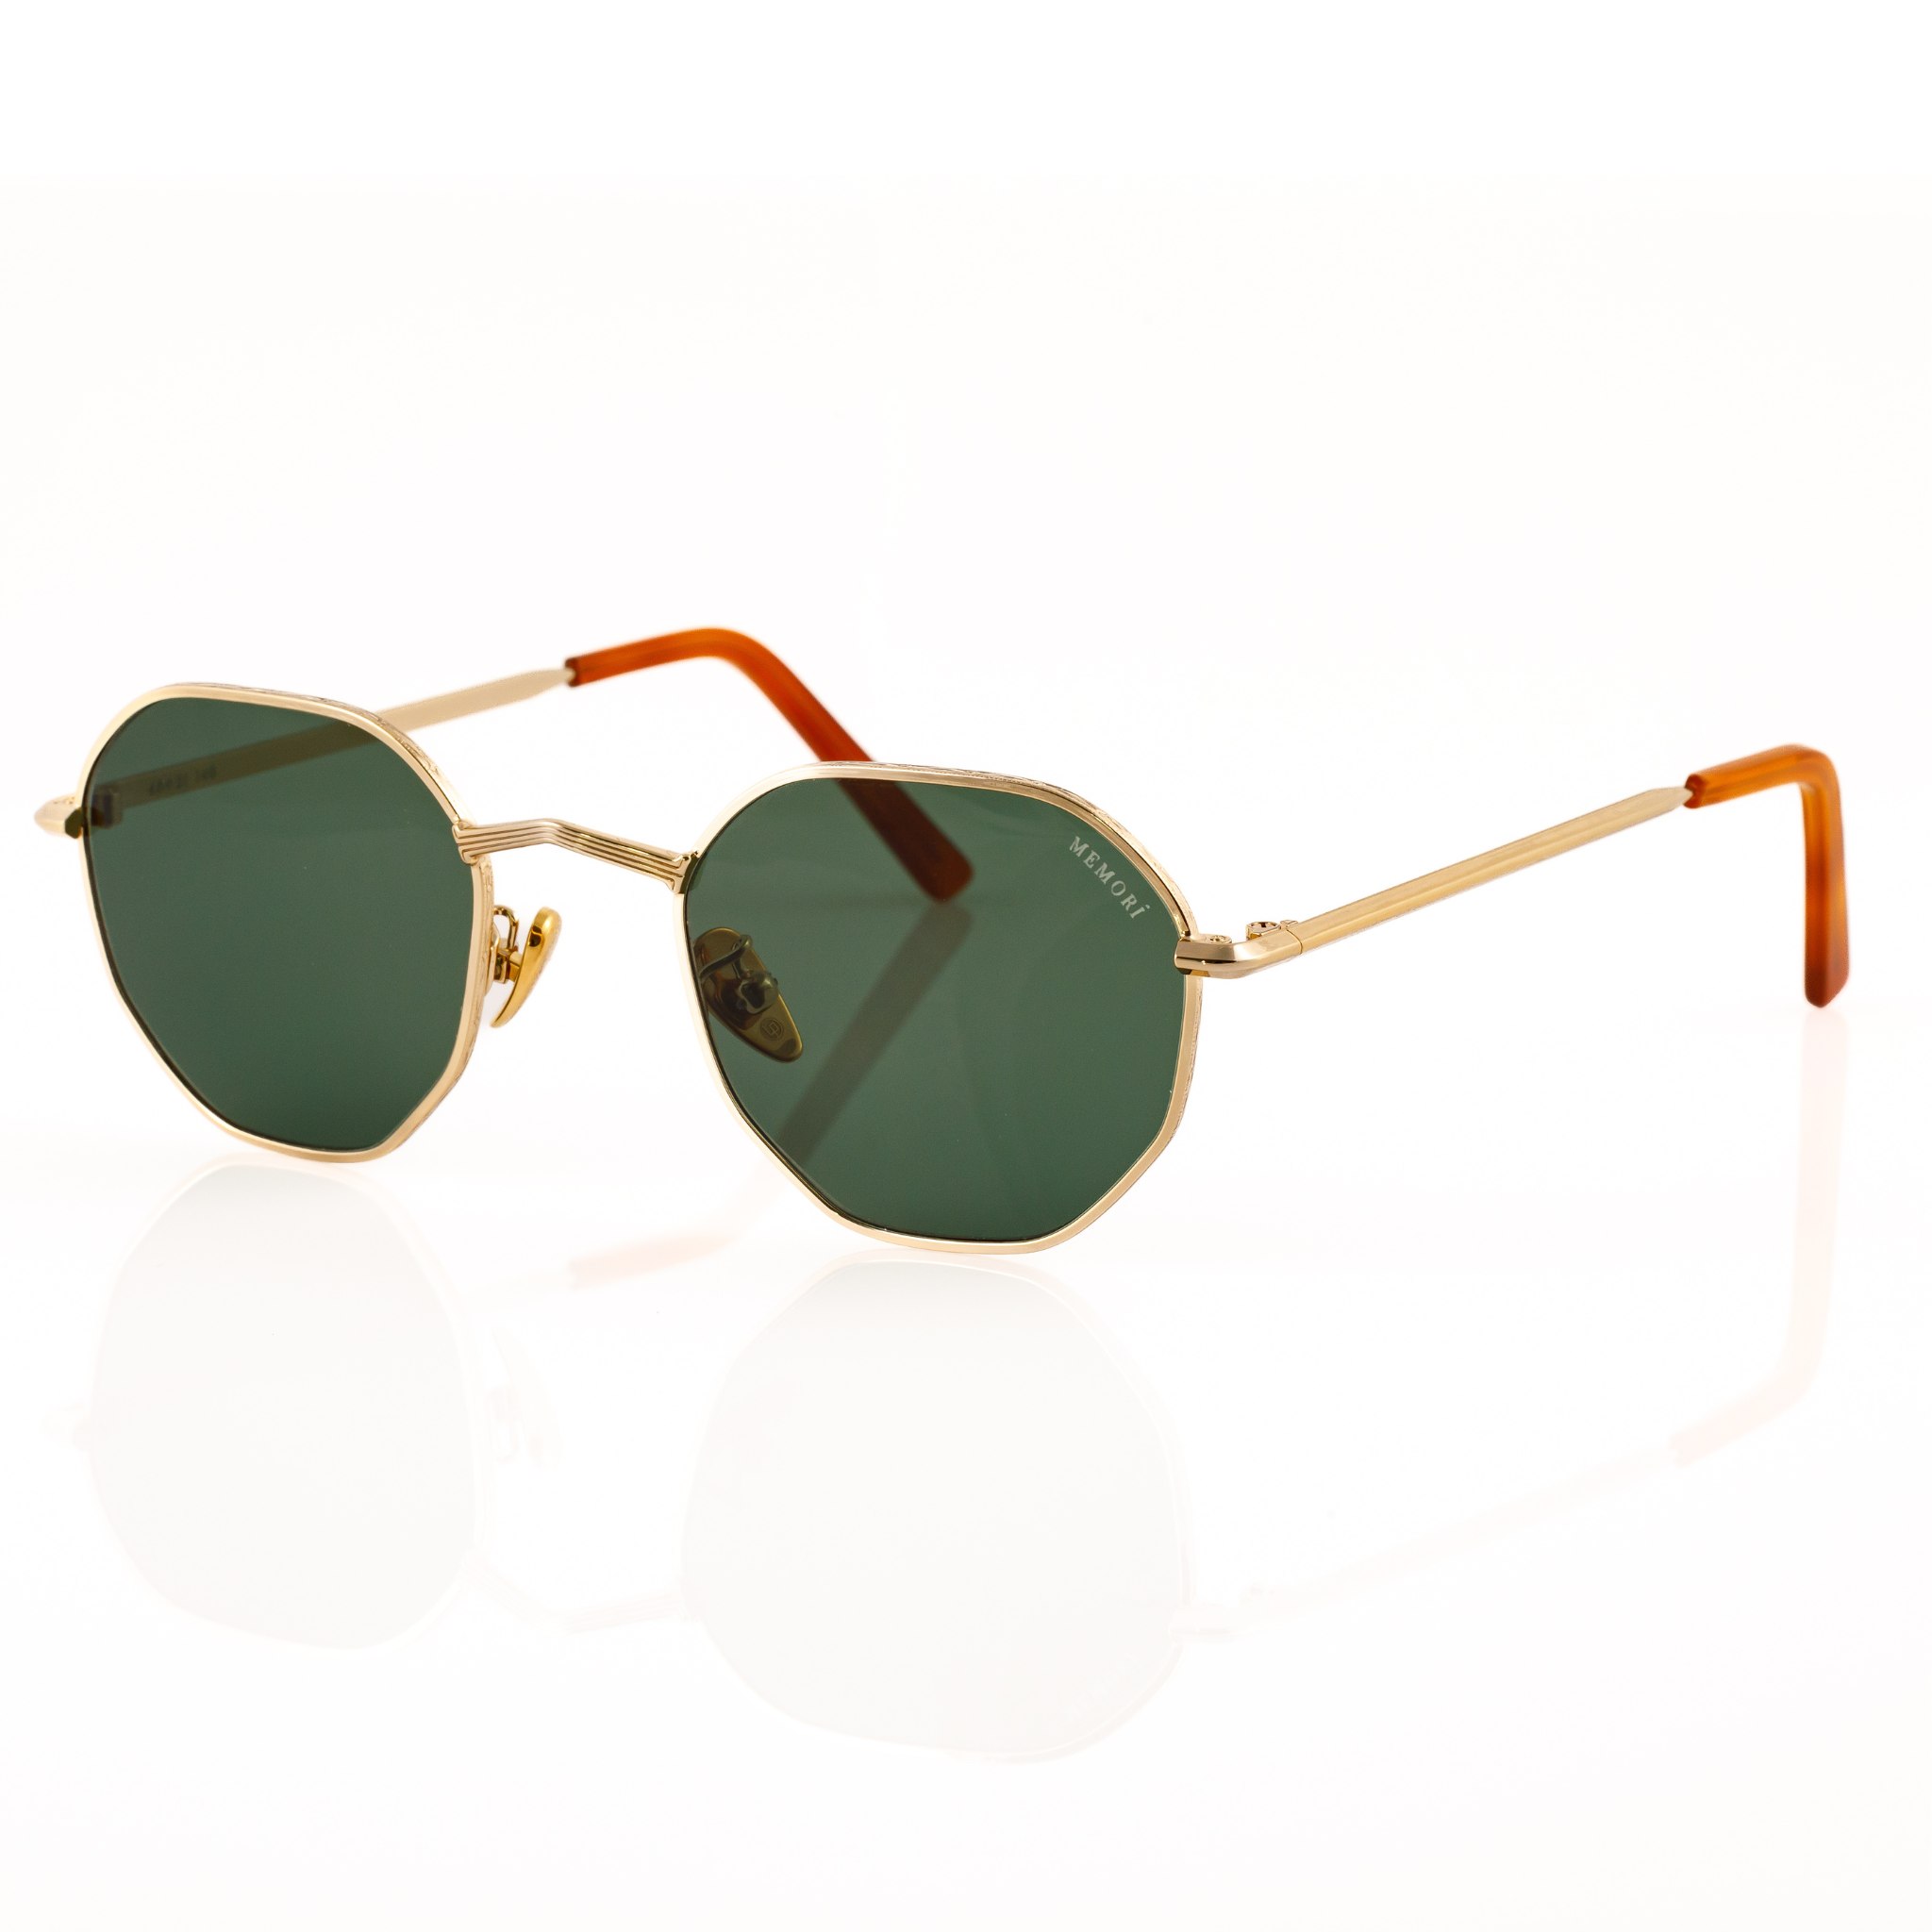 Best gold metal hexagon sunglasses for small faces for men or women. Features V nose bridge and green lenses. side view features metal linear etching on V nose bridge and "Memorí" logo written in upper corner of lens. 